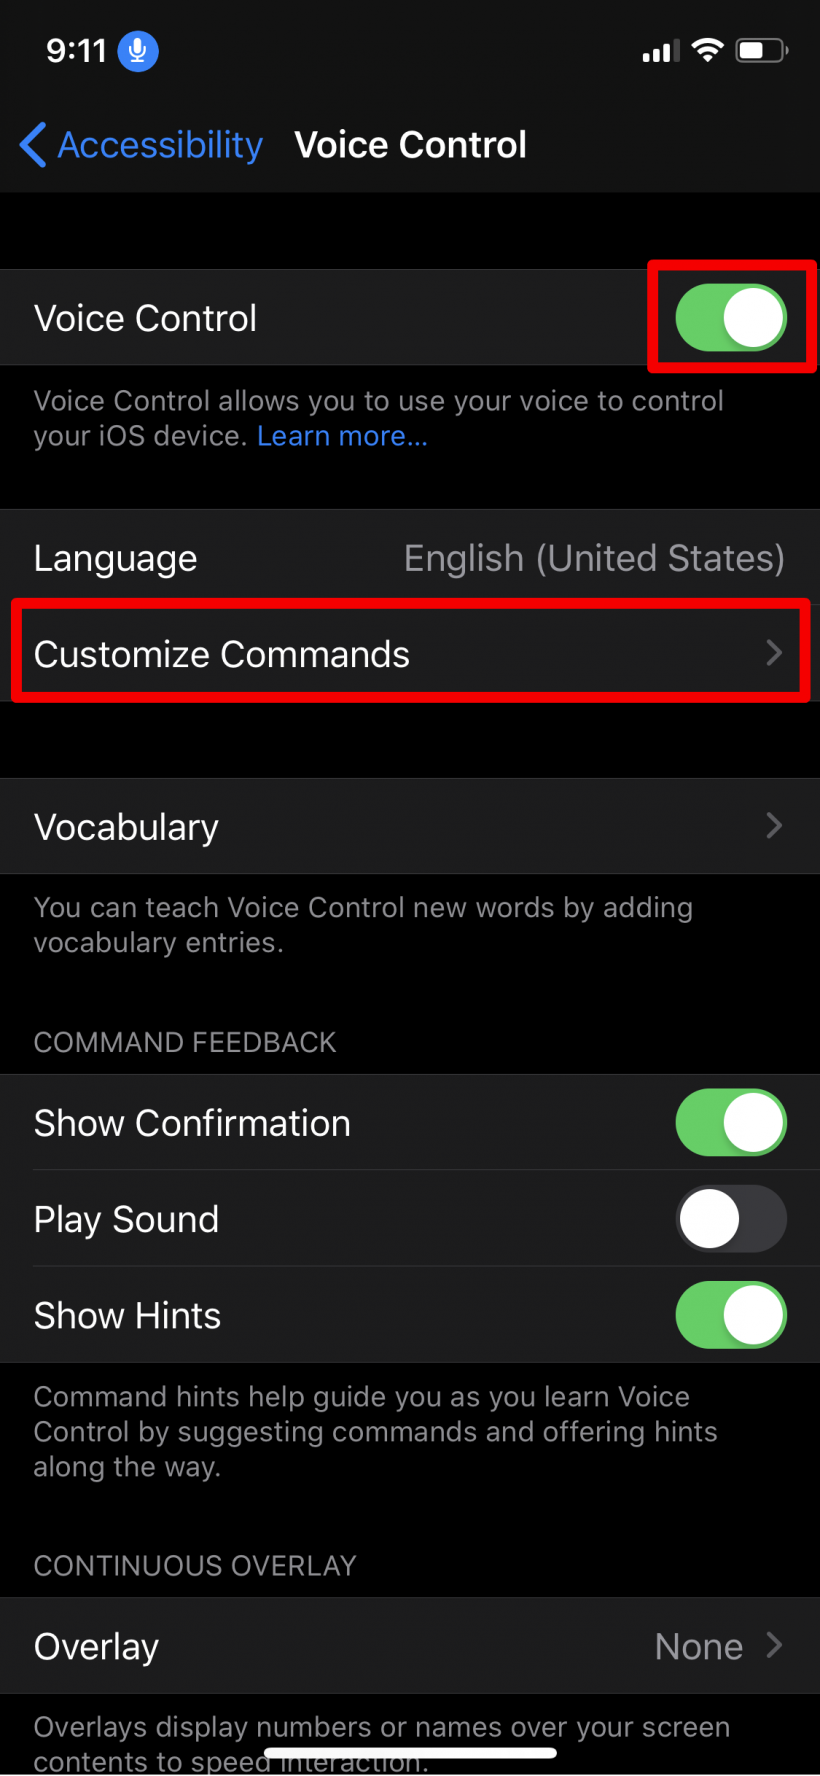 How to create custom voice commands for Voice Control accessibility on iPhone and iPad.